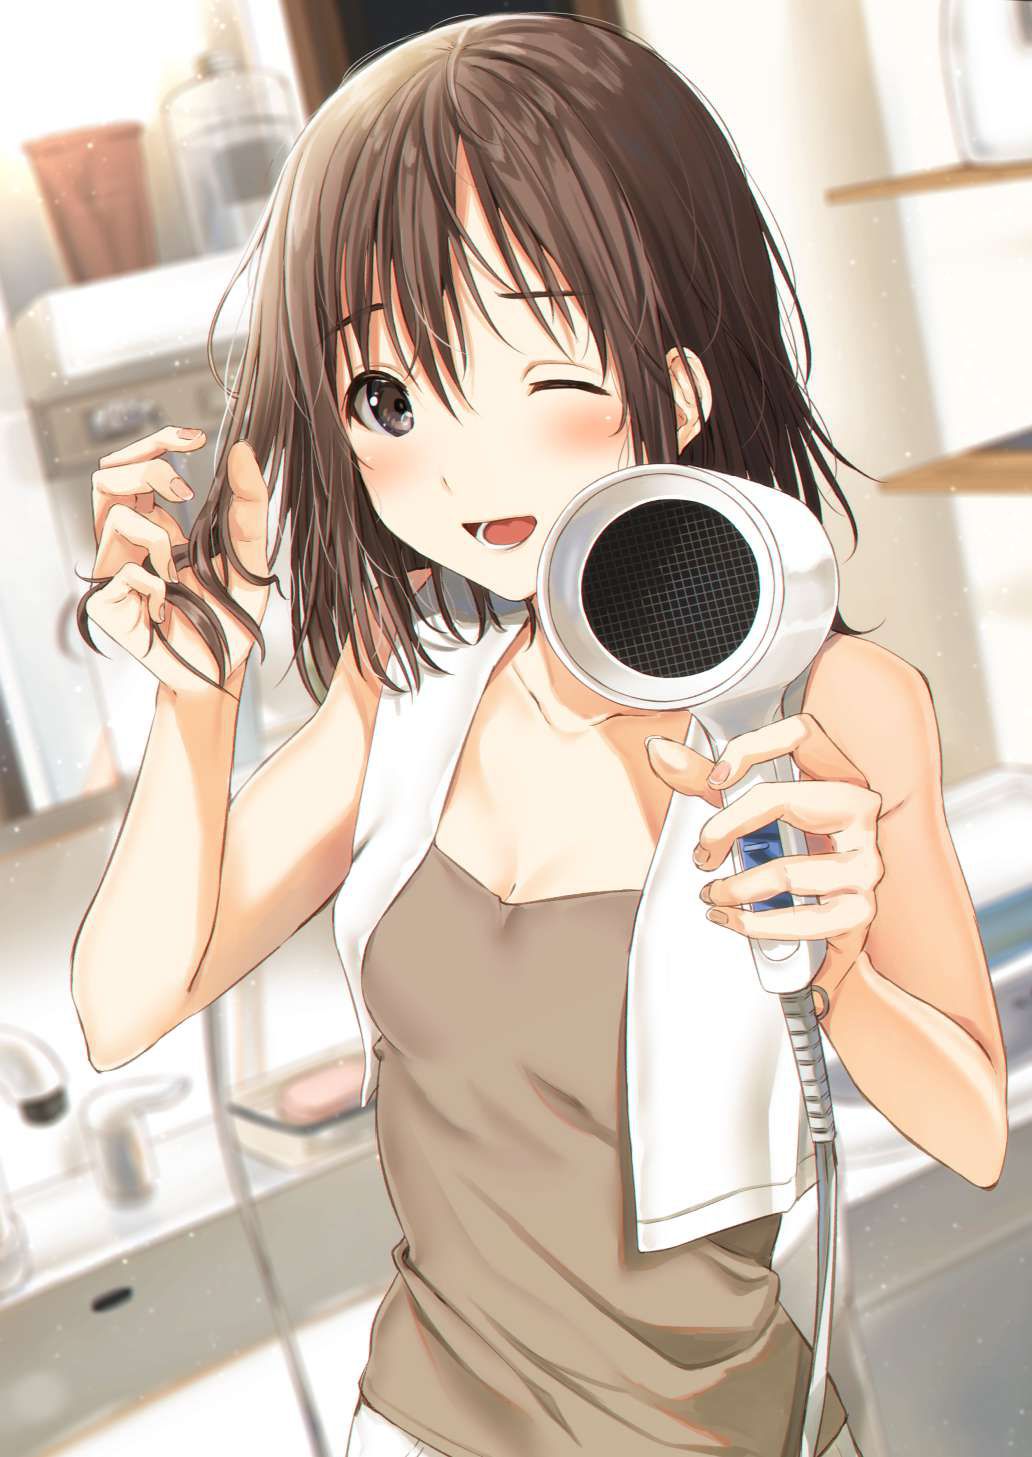 Secondary erotic image of a girl after a bath drying her hair with a hair dryer 15